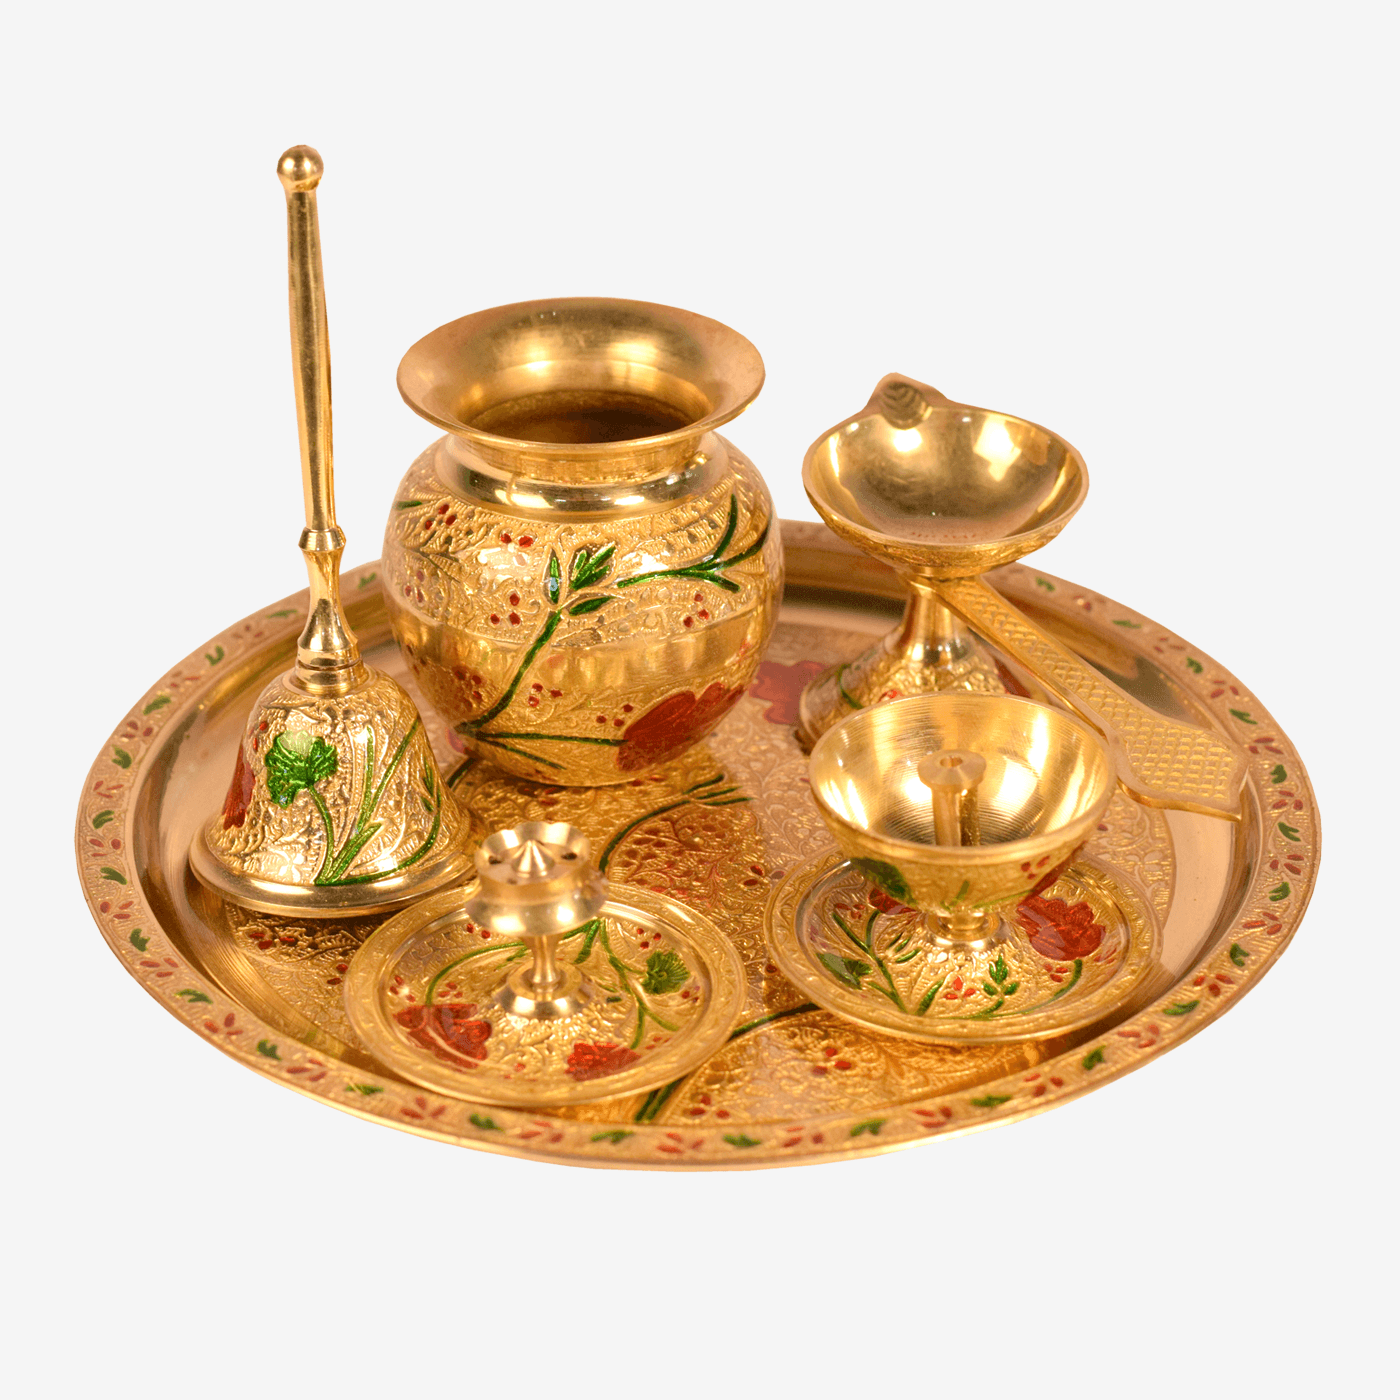 Online Shopping for Pooja items, silver / brass puja thali sets